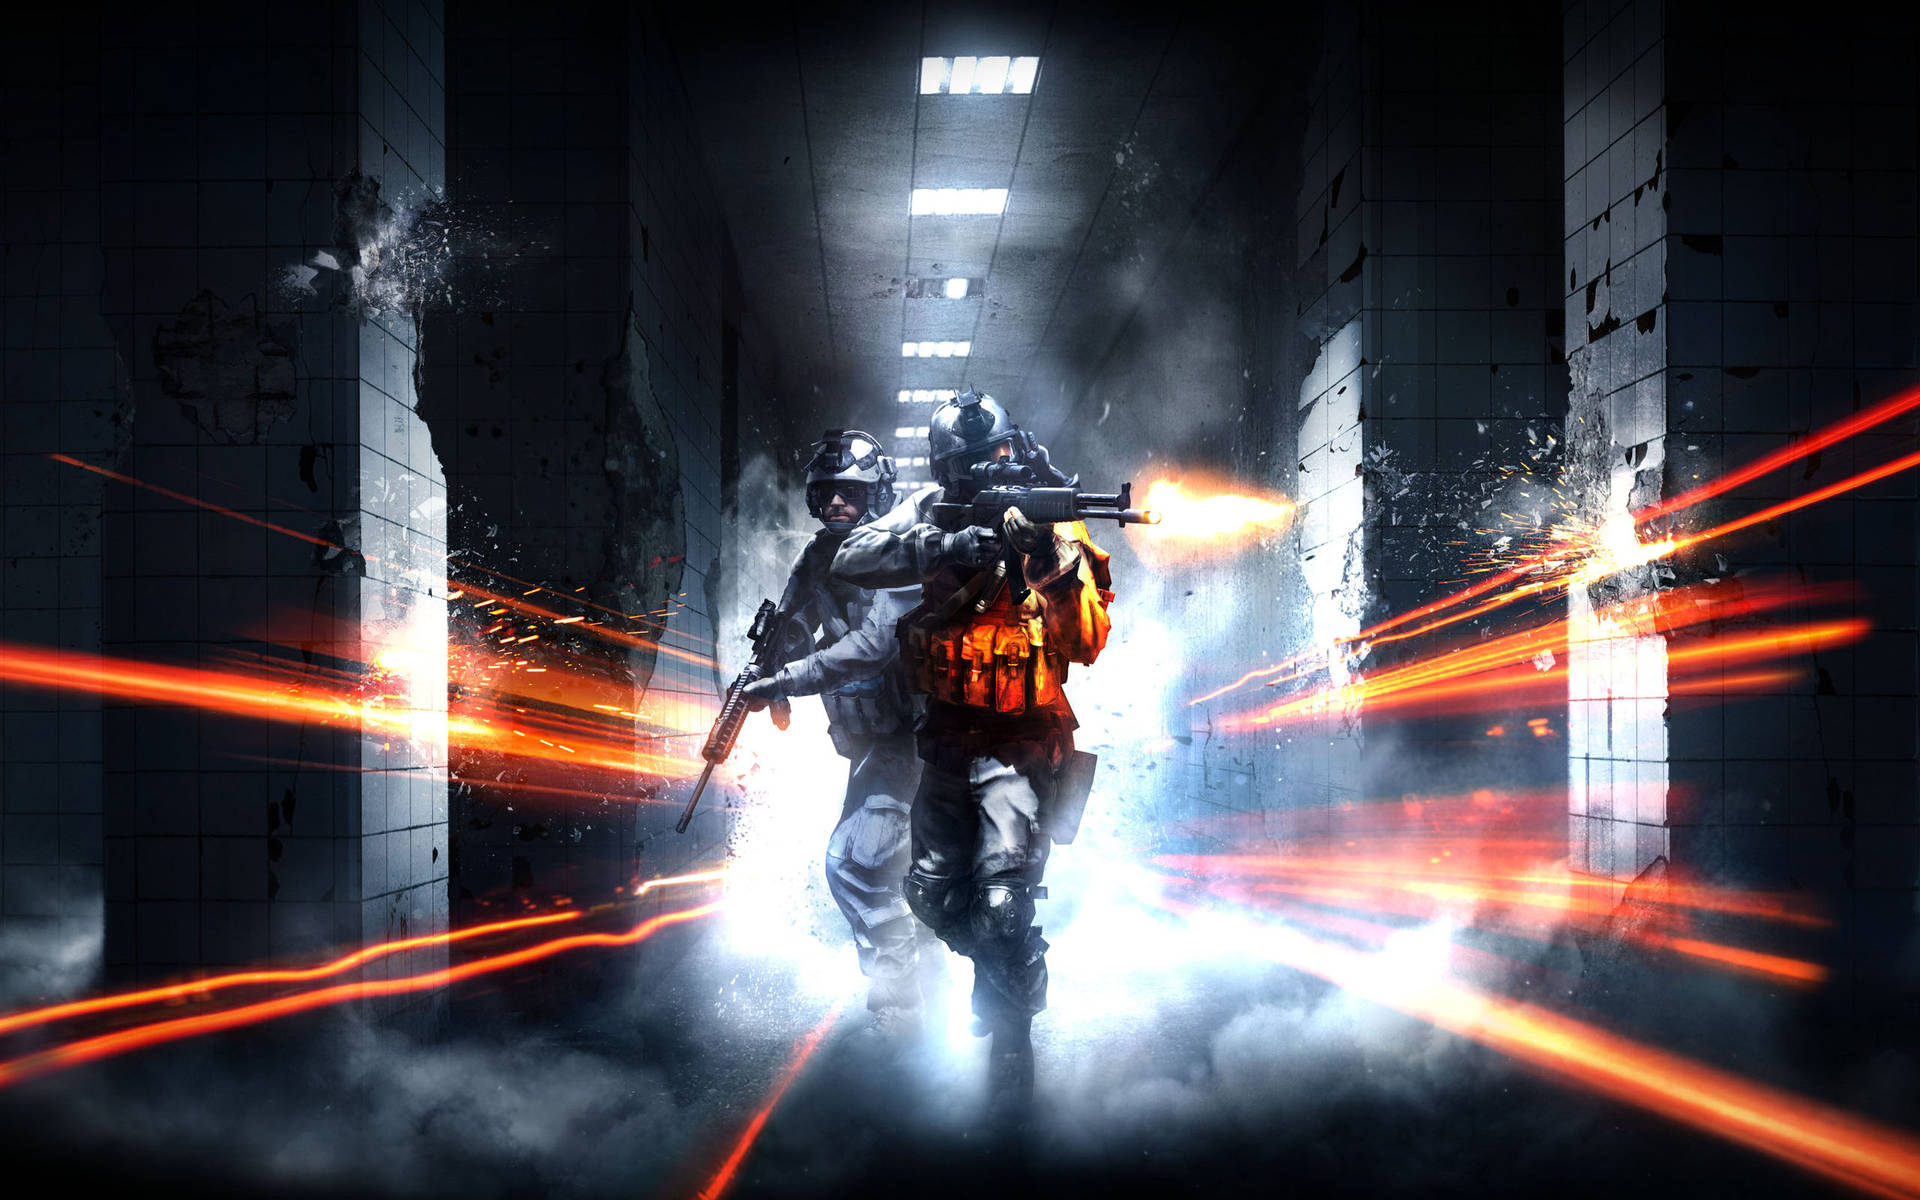 Cool Battlefield 3 Soldiers And Laser Lights Wallpaper